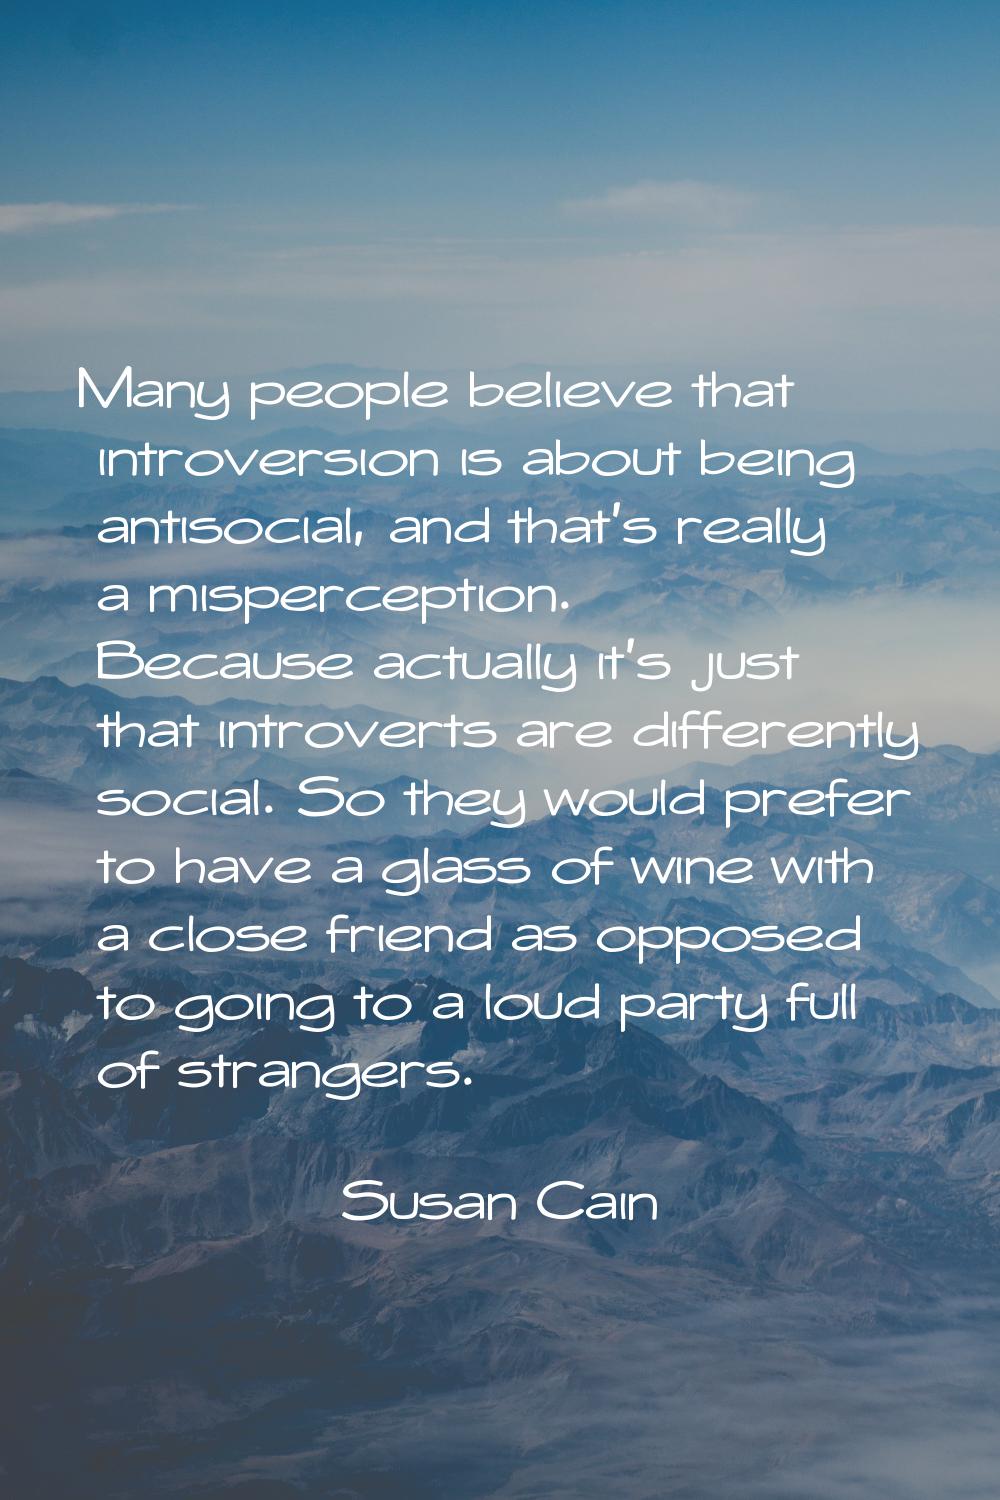 Many people believe that introversion is about being antisocial, and that's really a misperception.